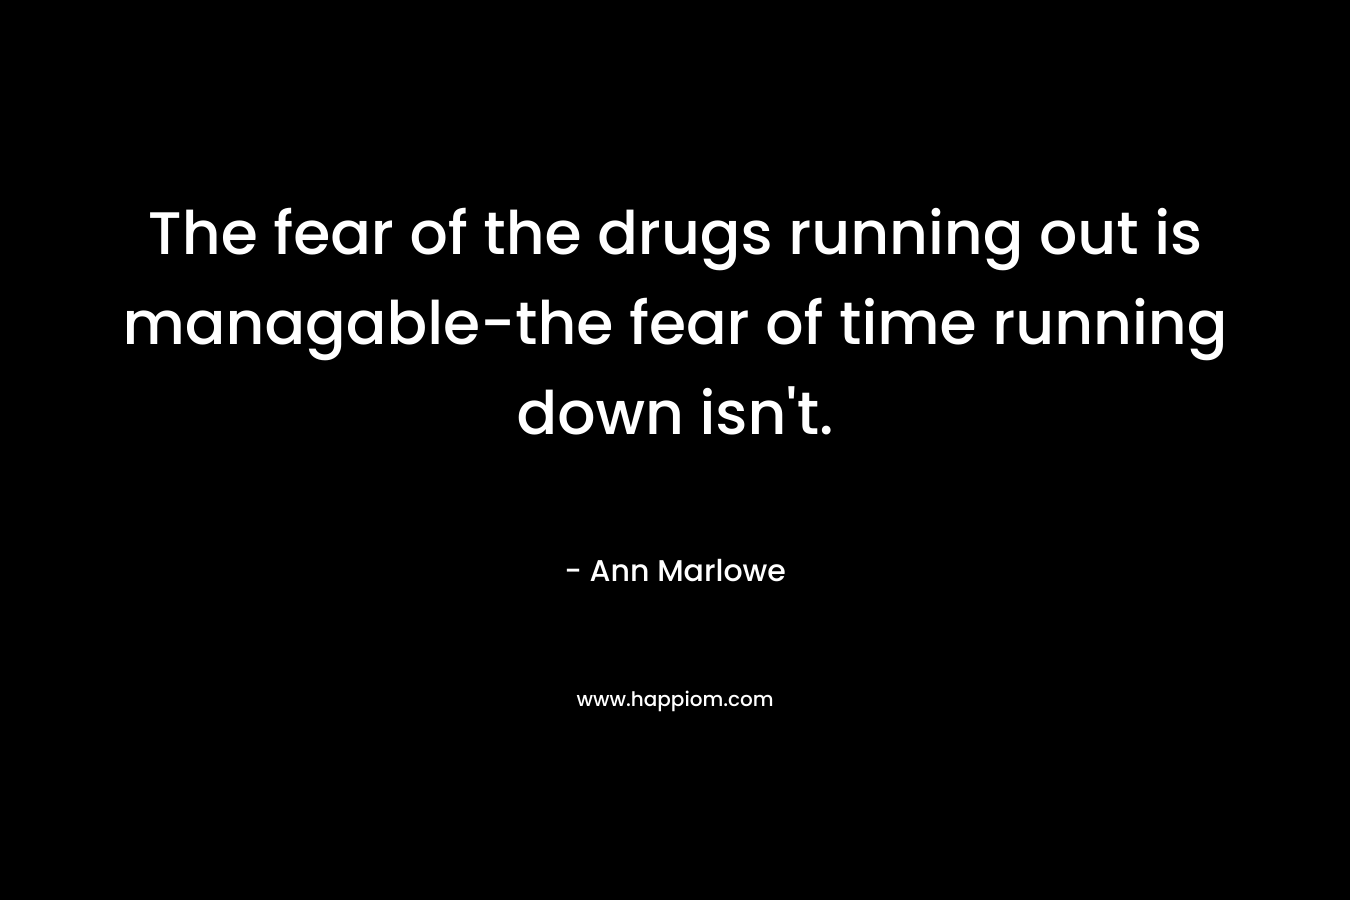 The fear of the drugs running out is managable-the fear of time running down isn't.